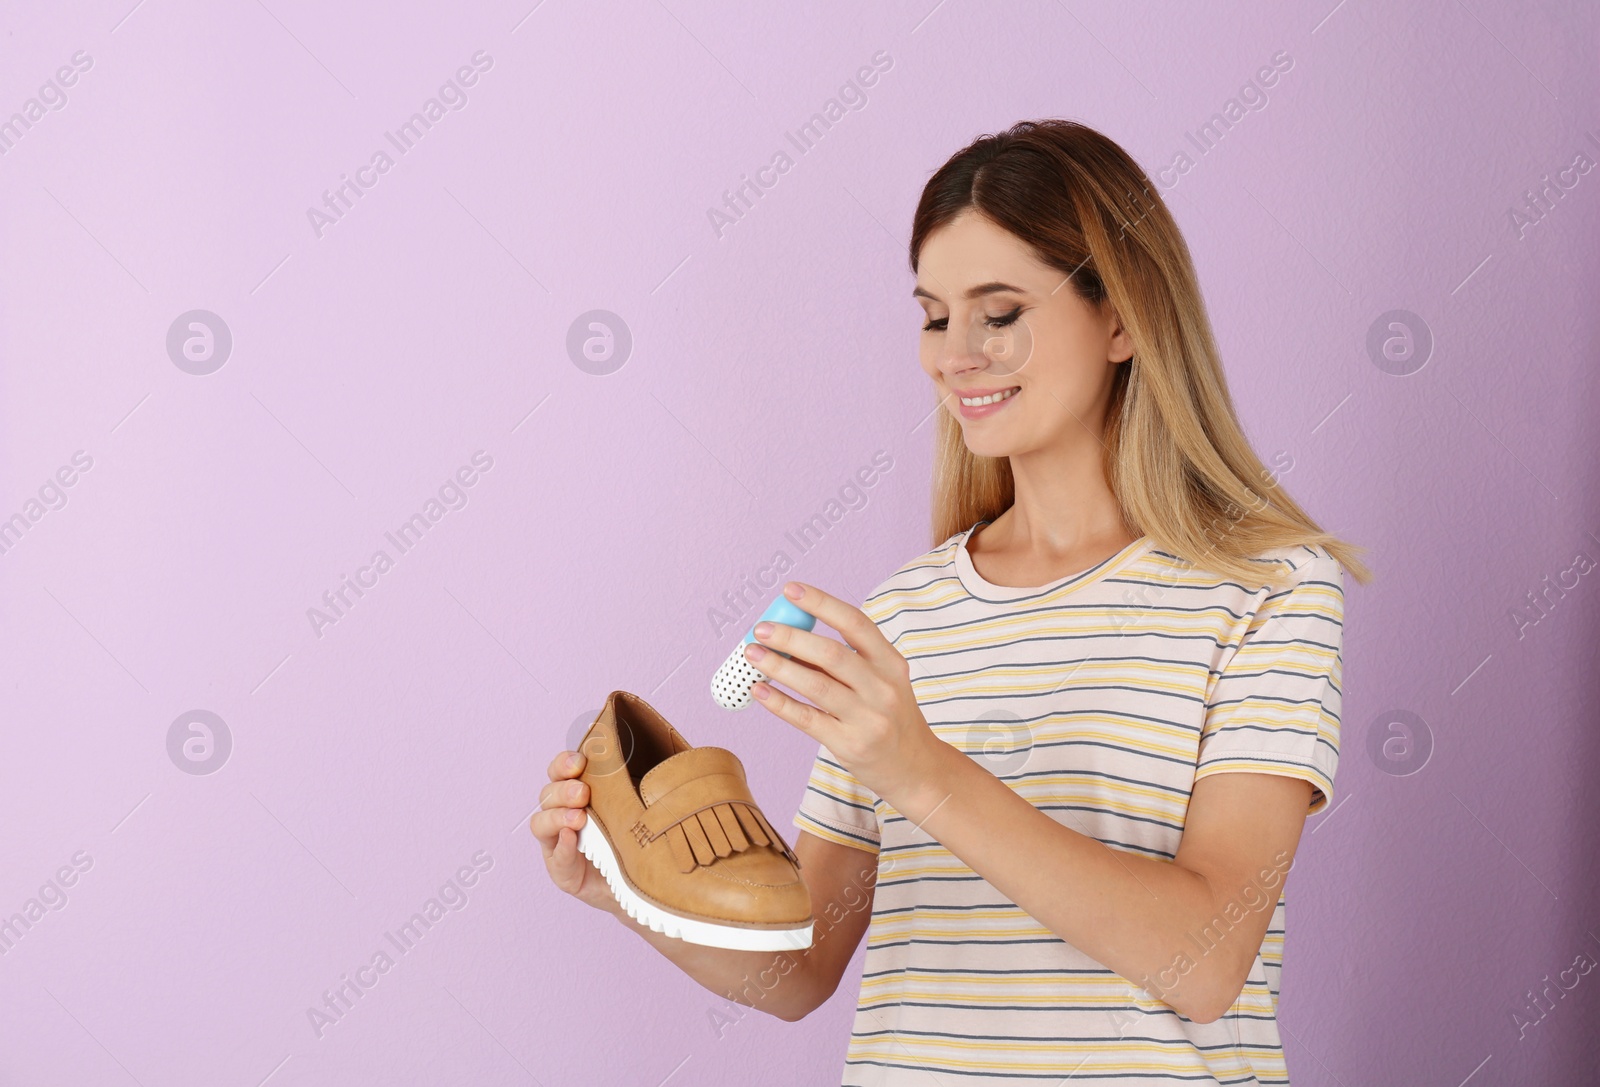 Photo of Woman putting capsule shoe freshener in footwear on color background